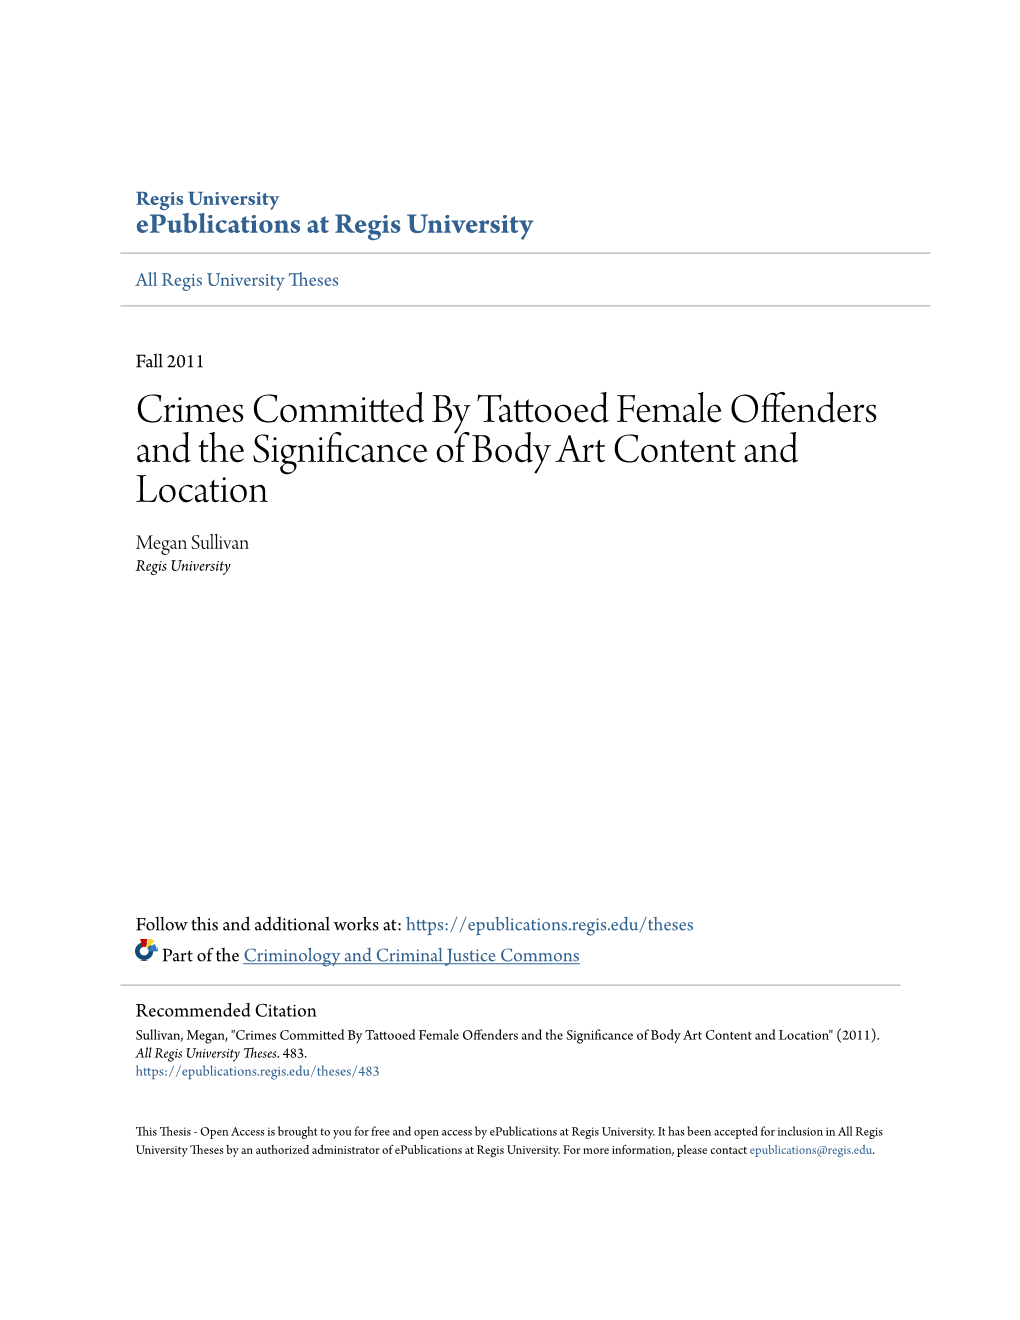 Crimes Committed by Tattooed Female Offenders and the Significance of Body Art Content and Location Megan Sullivan Regis University